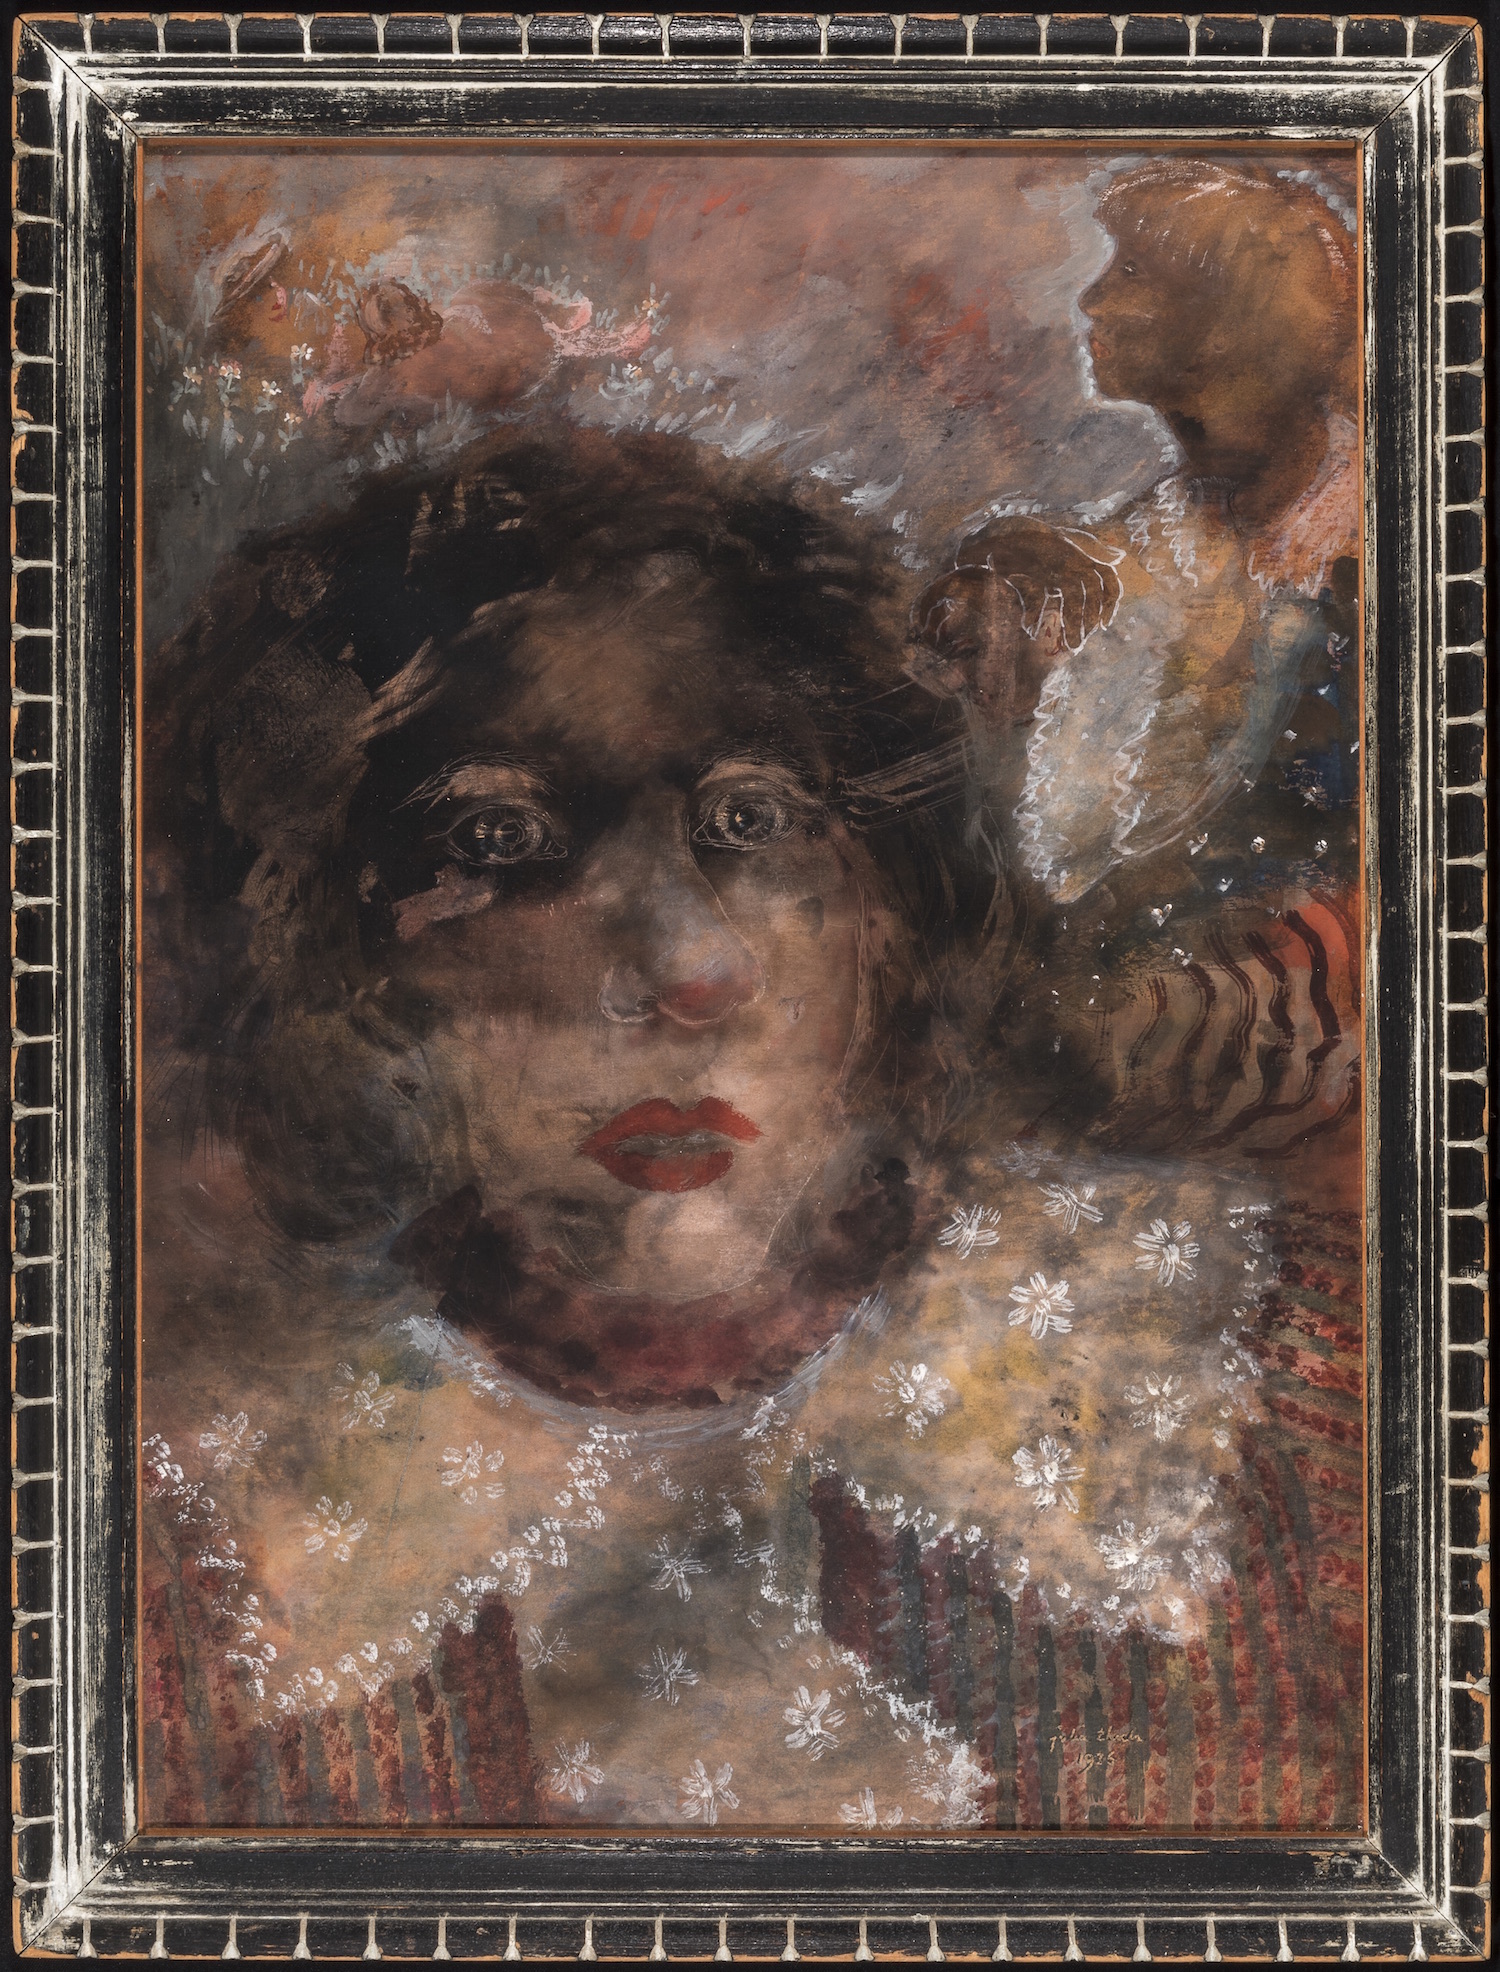 Fig. 10. Julia Thecla. This, 1936. Opaque watercolor and charcoal on cardboard; 19 1⁄4 x 14 in